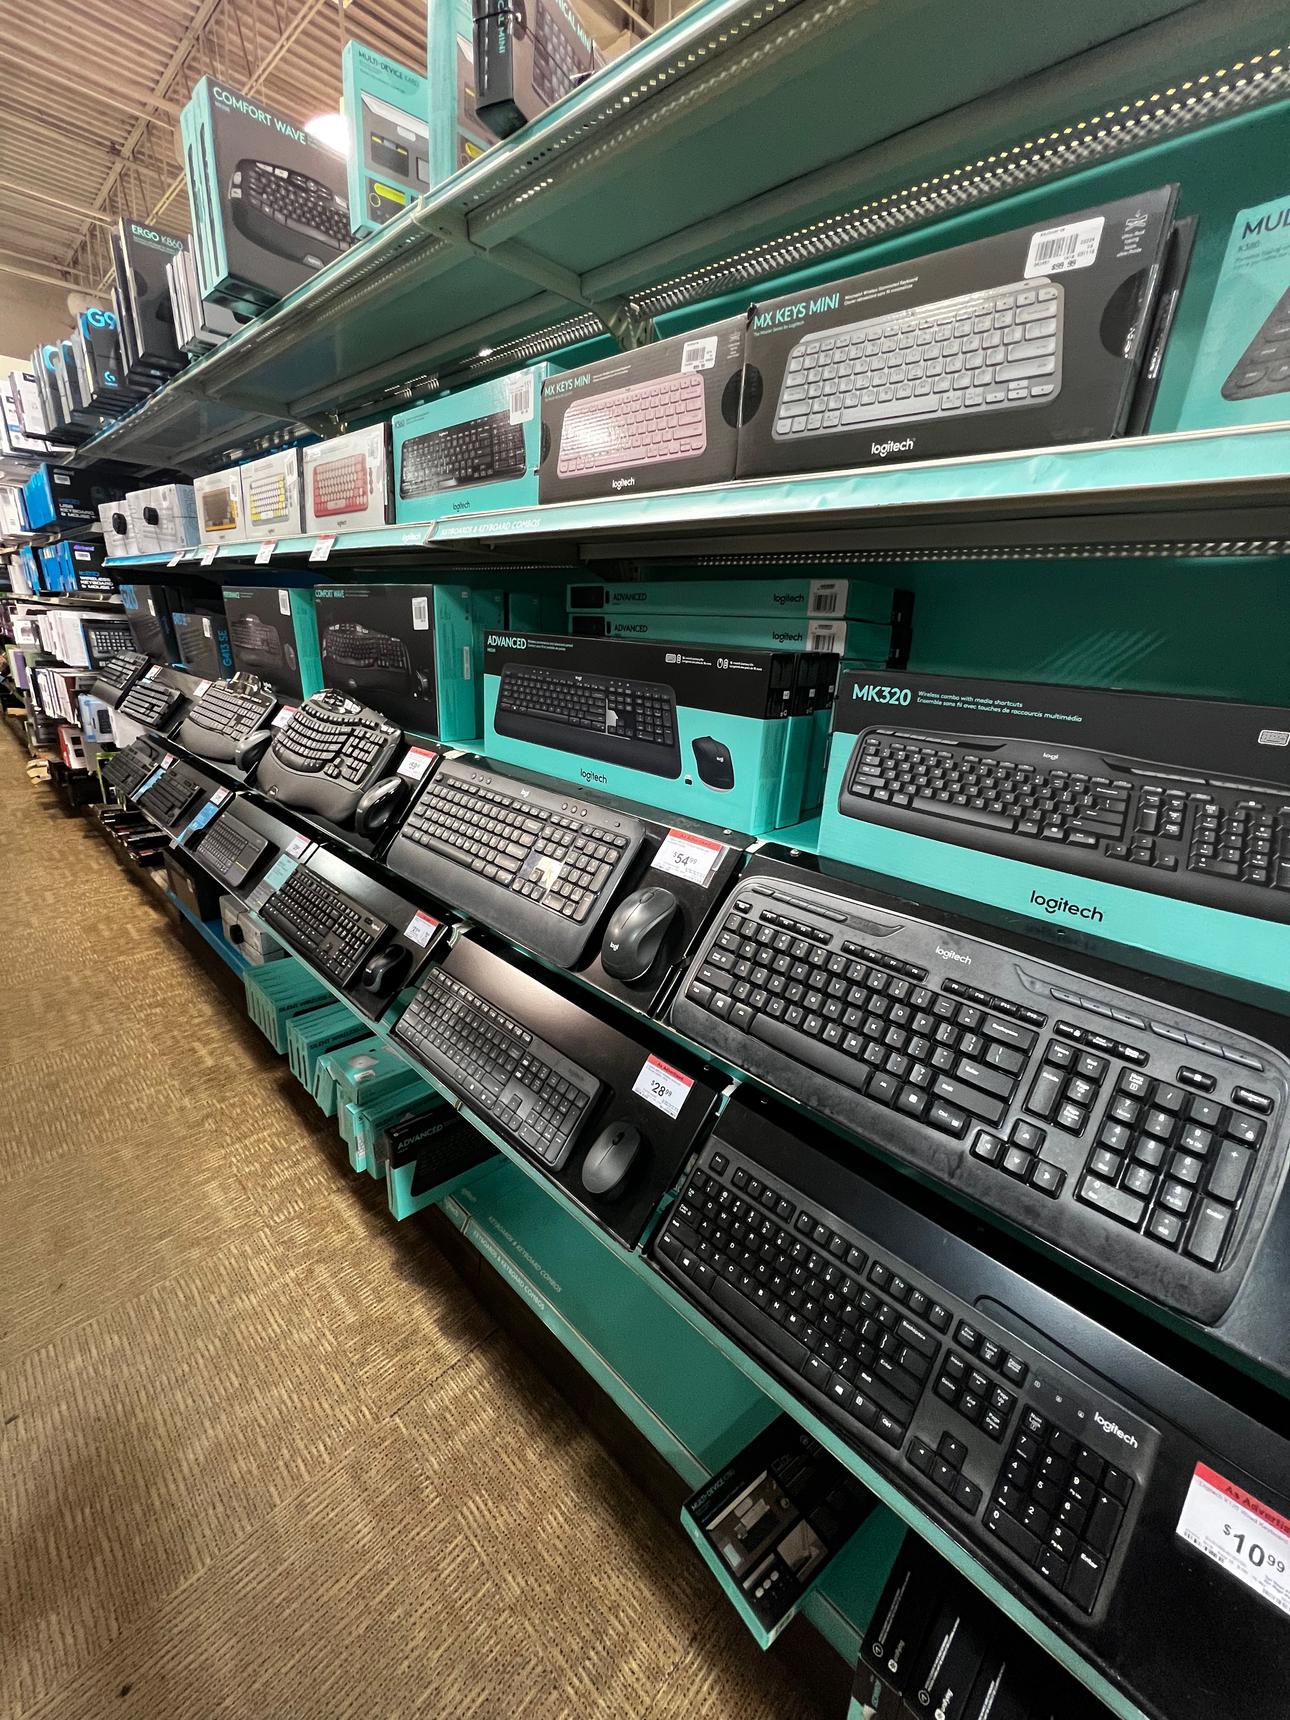 Shelves loaded with cheap keyboards